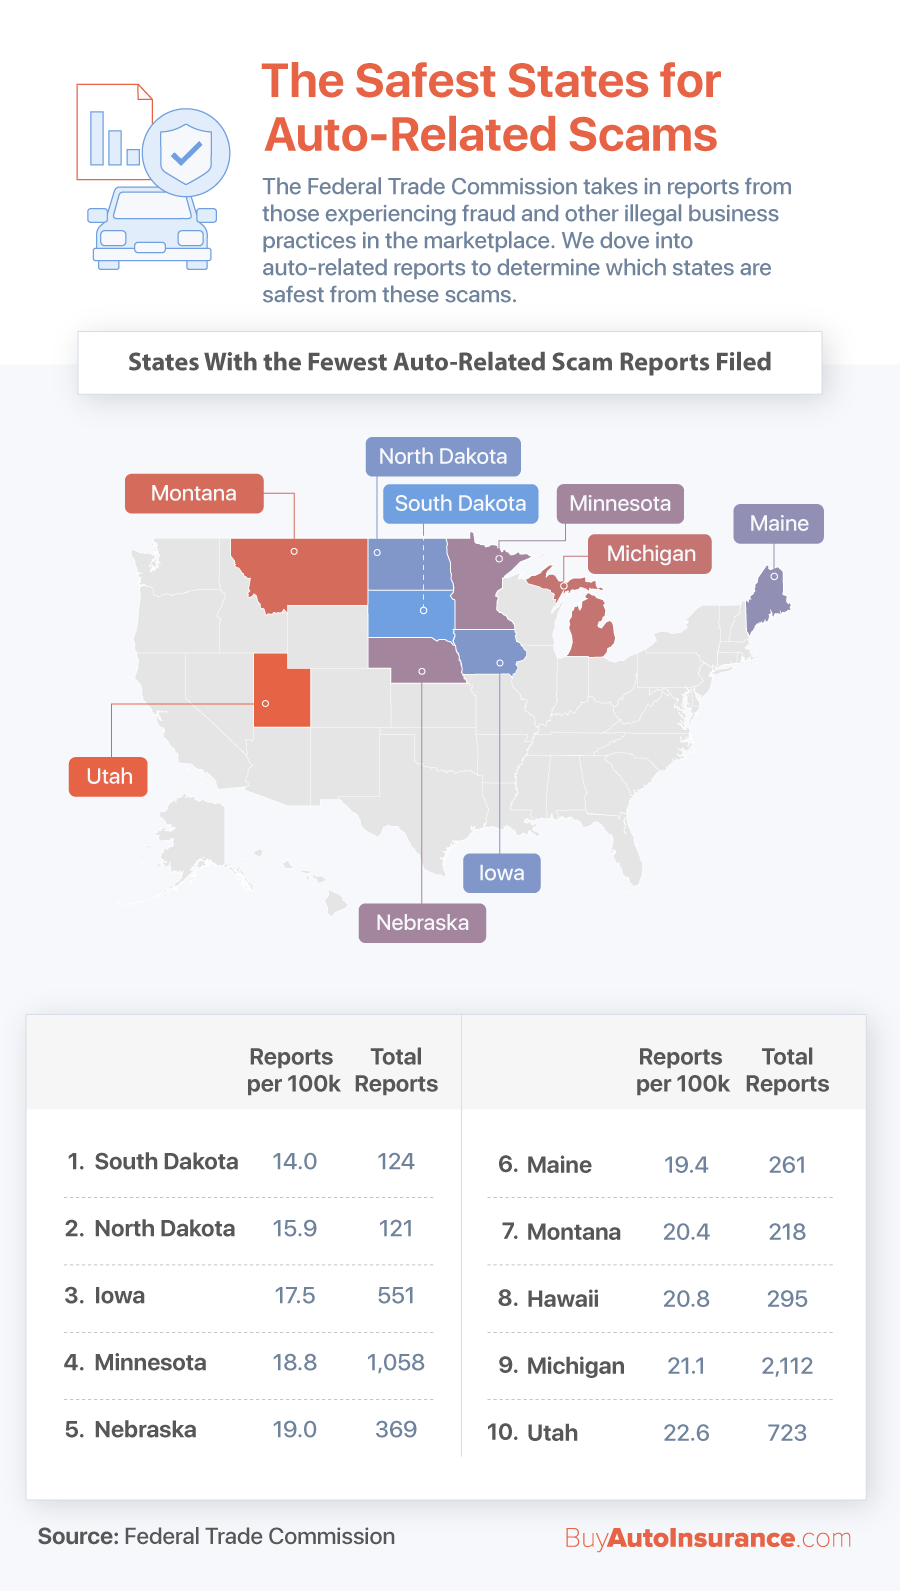 Safest States for Auto-Related Scams